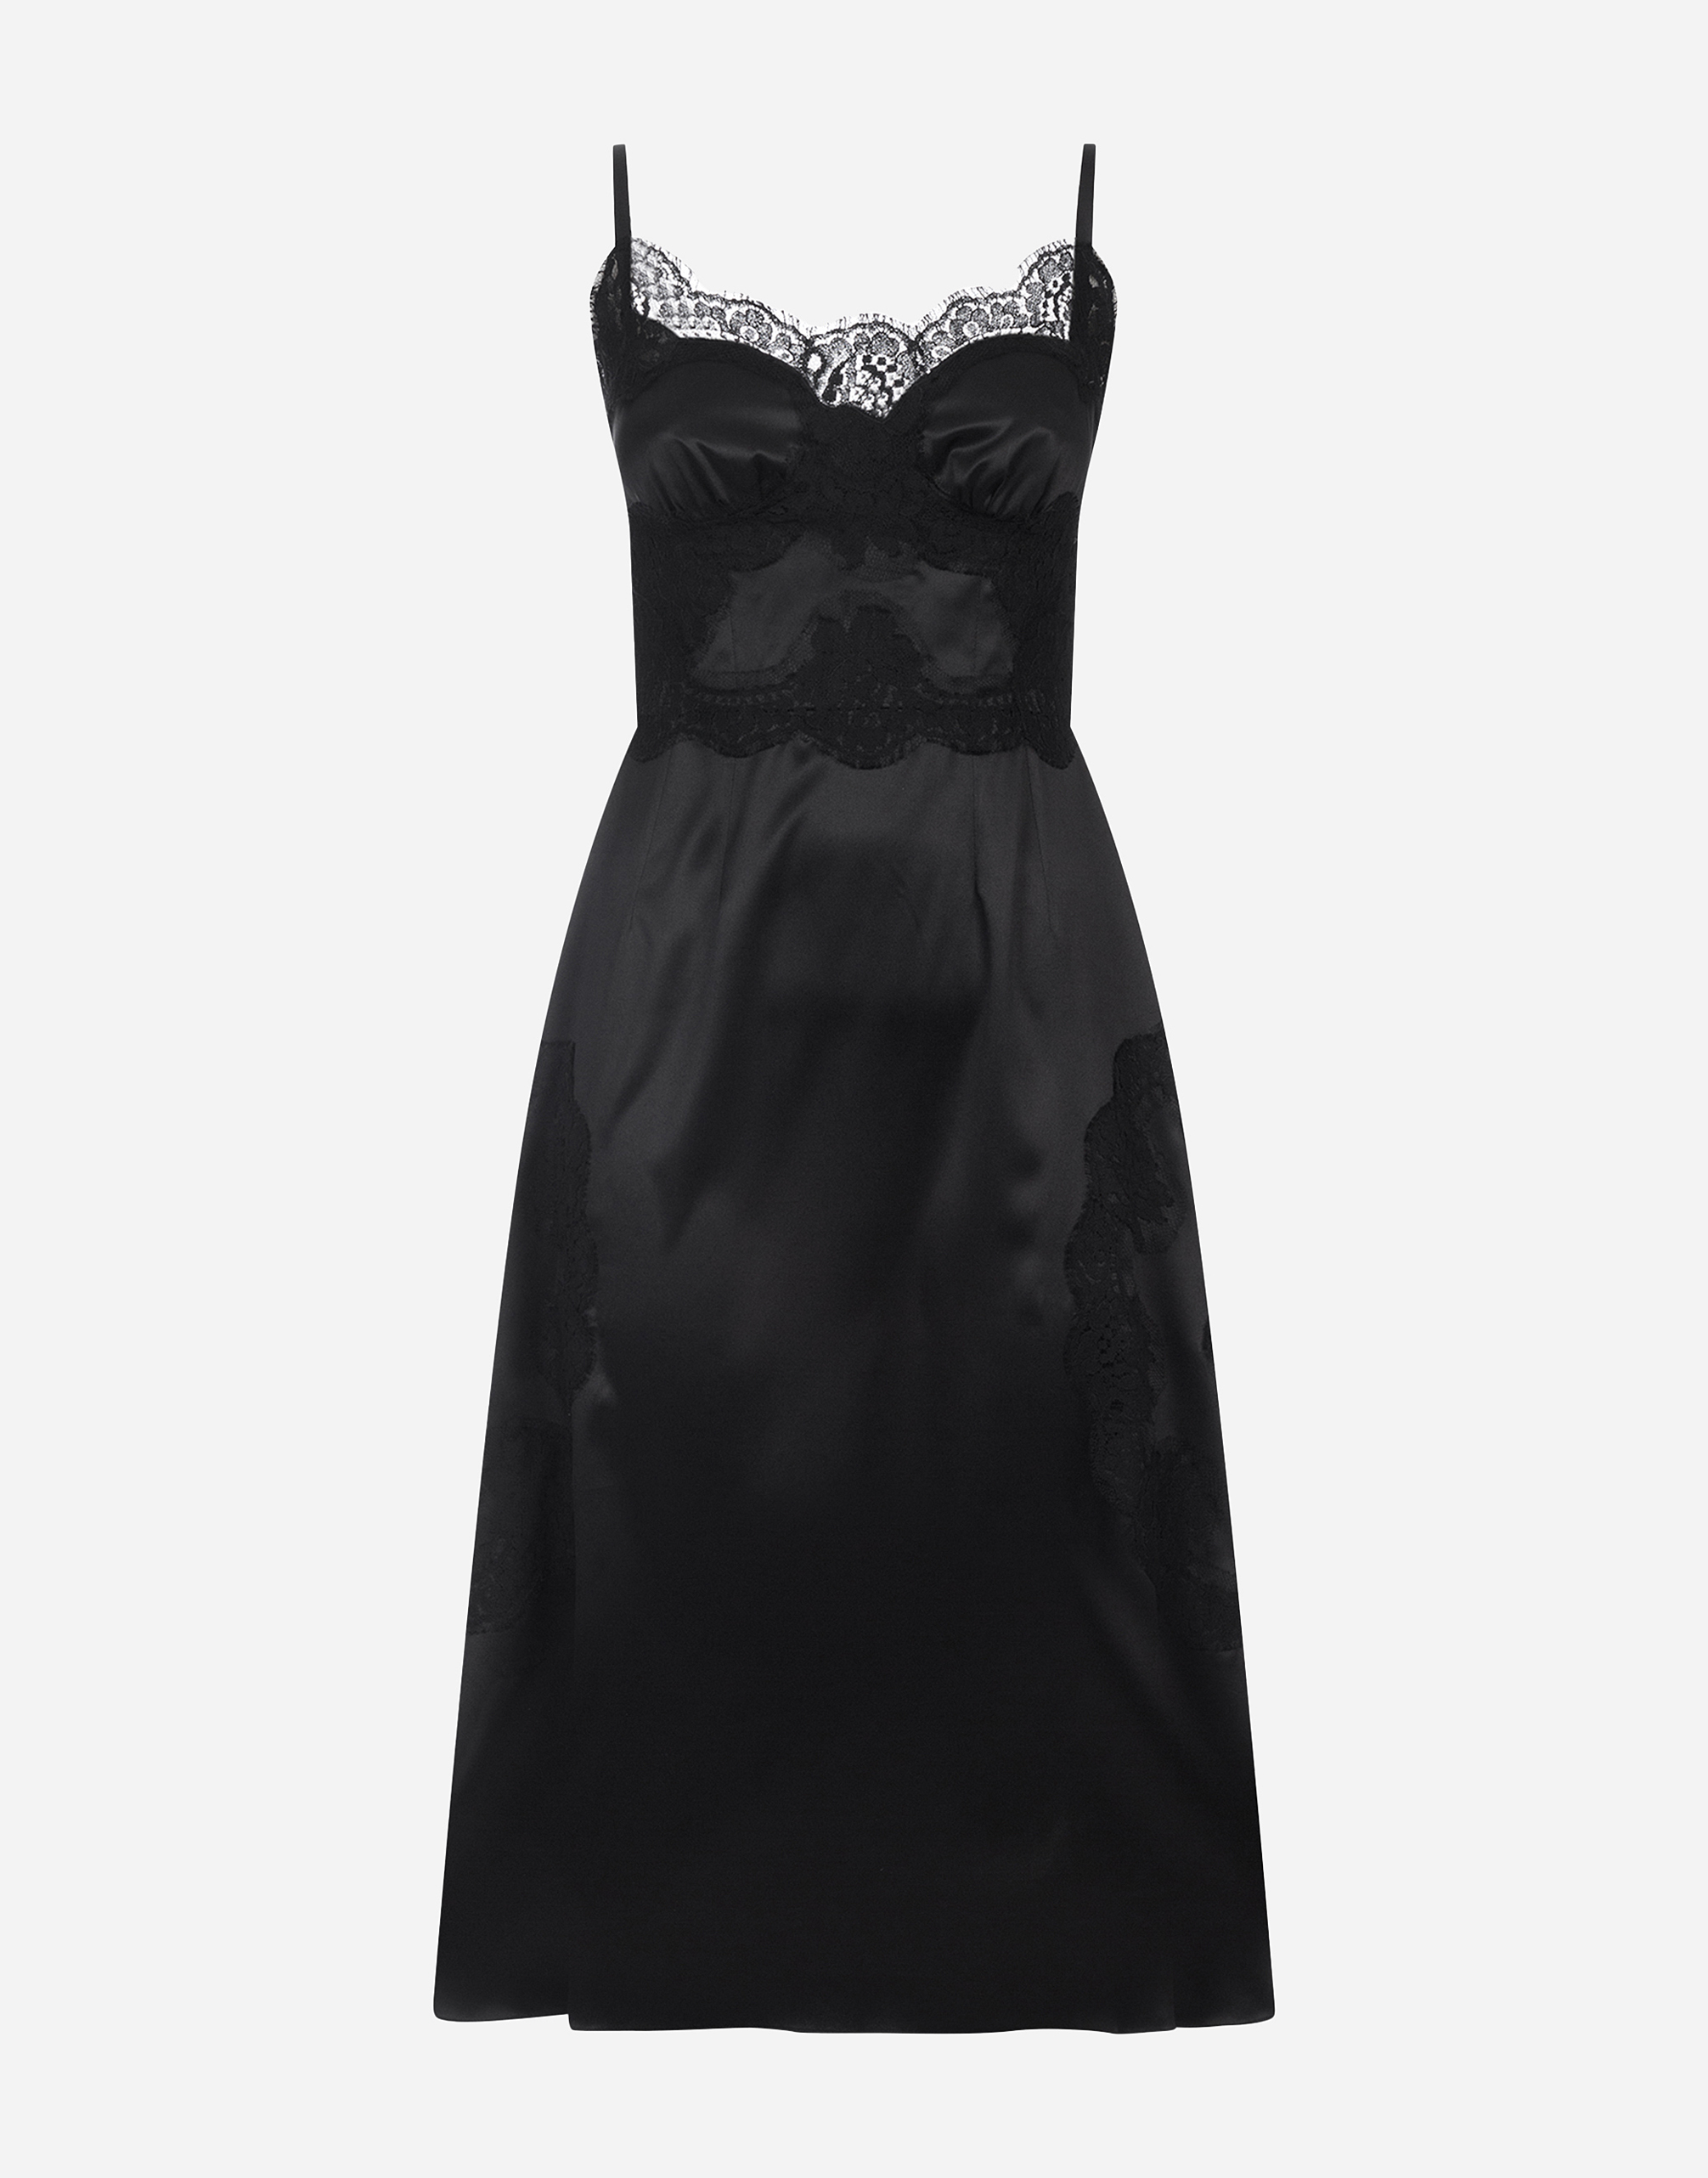 Satin and lace calf-length slip dress in Black